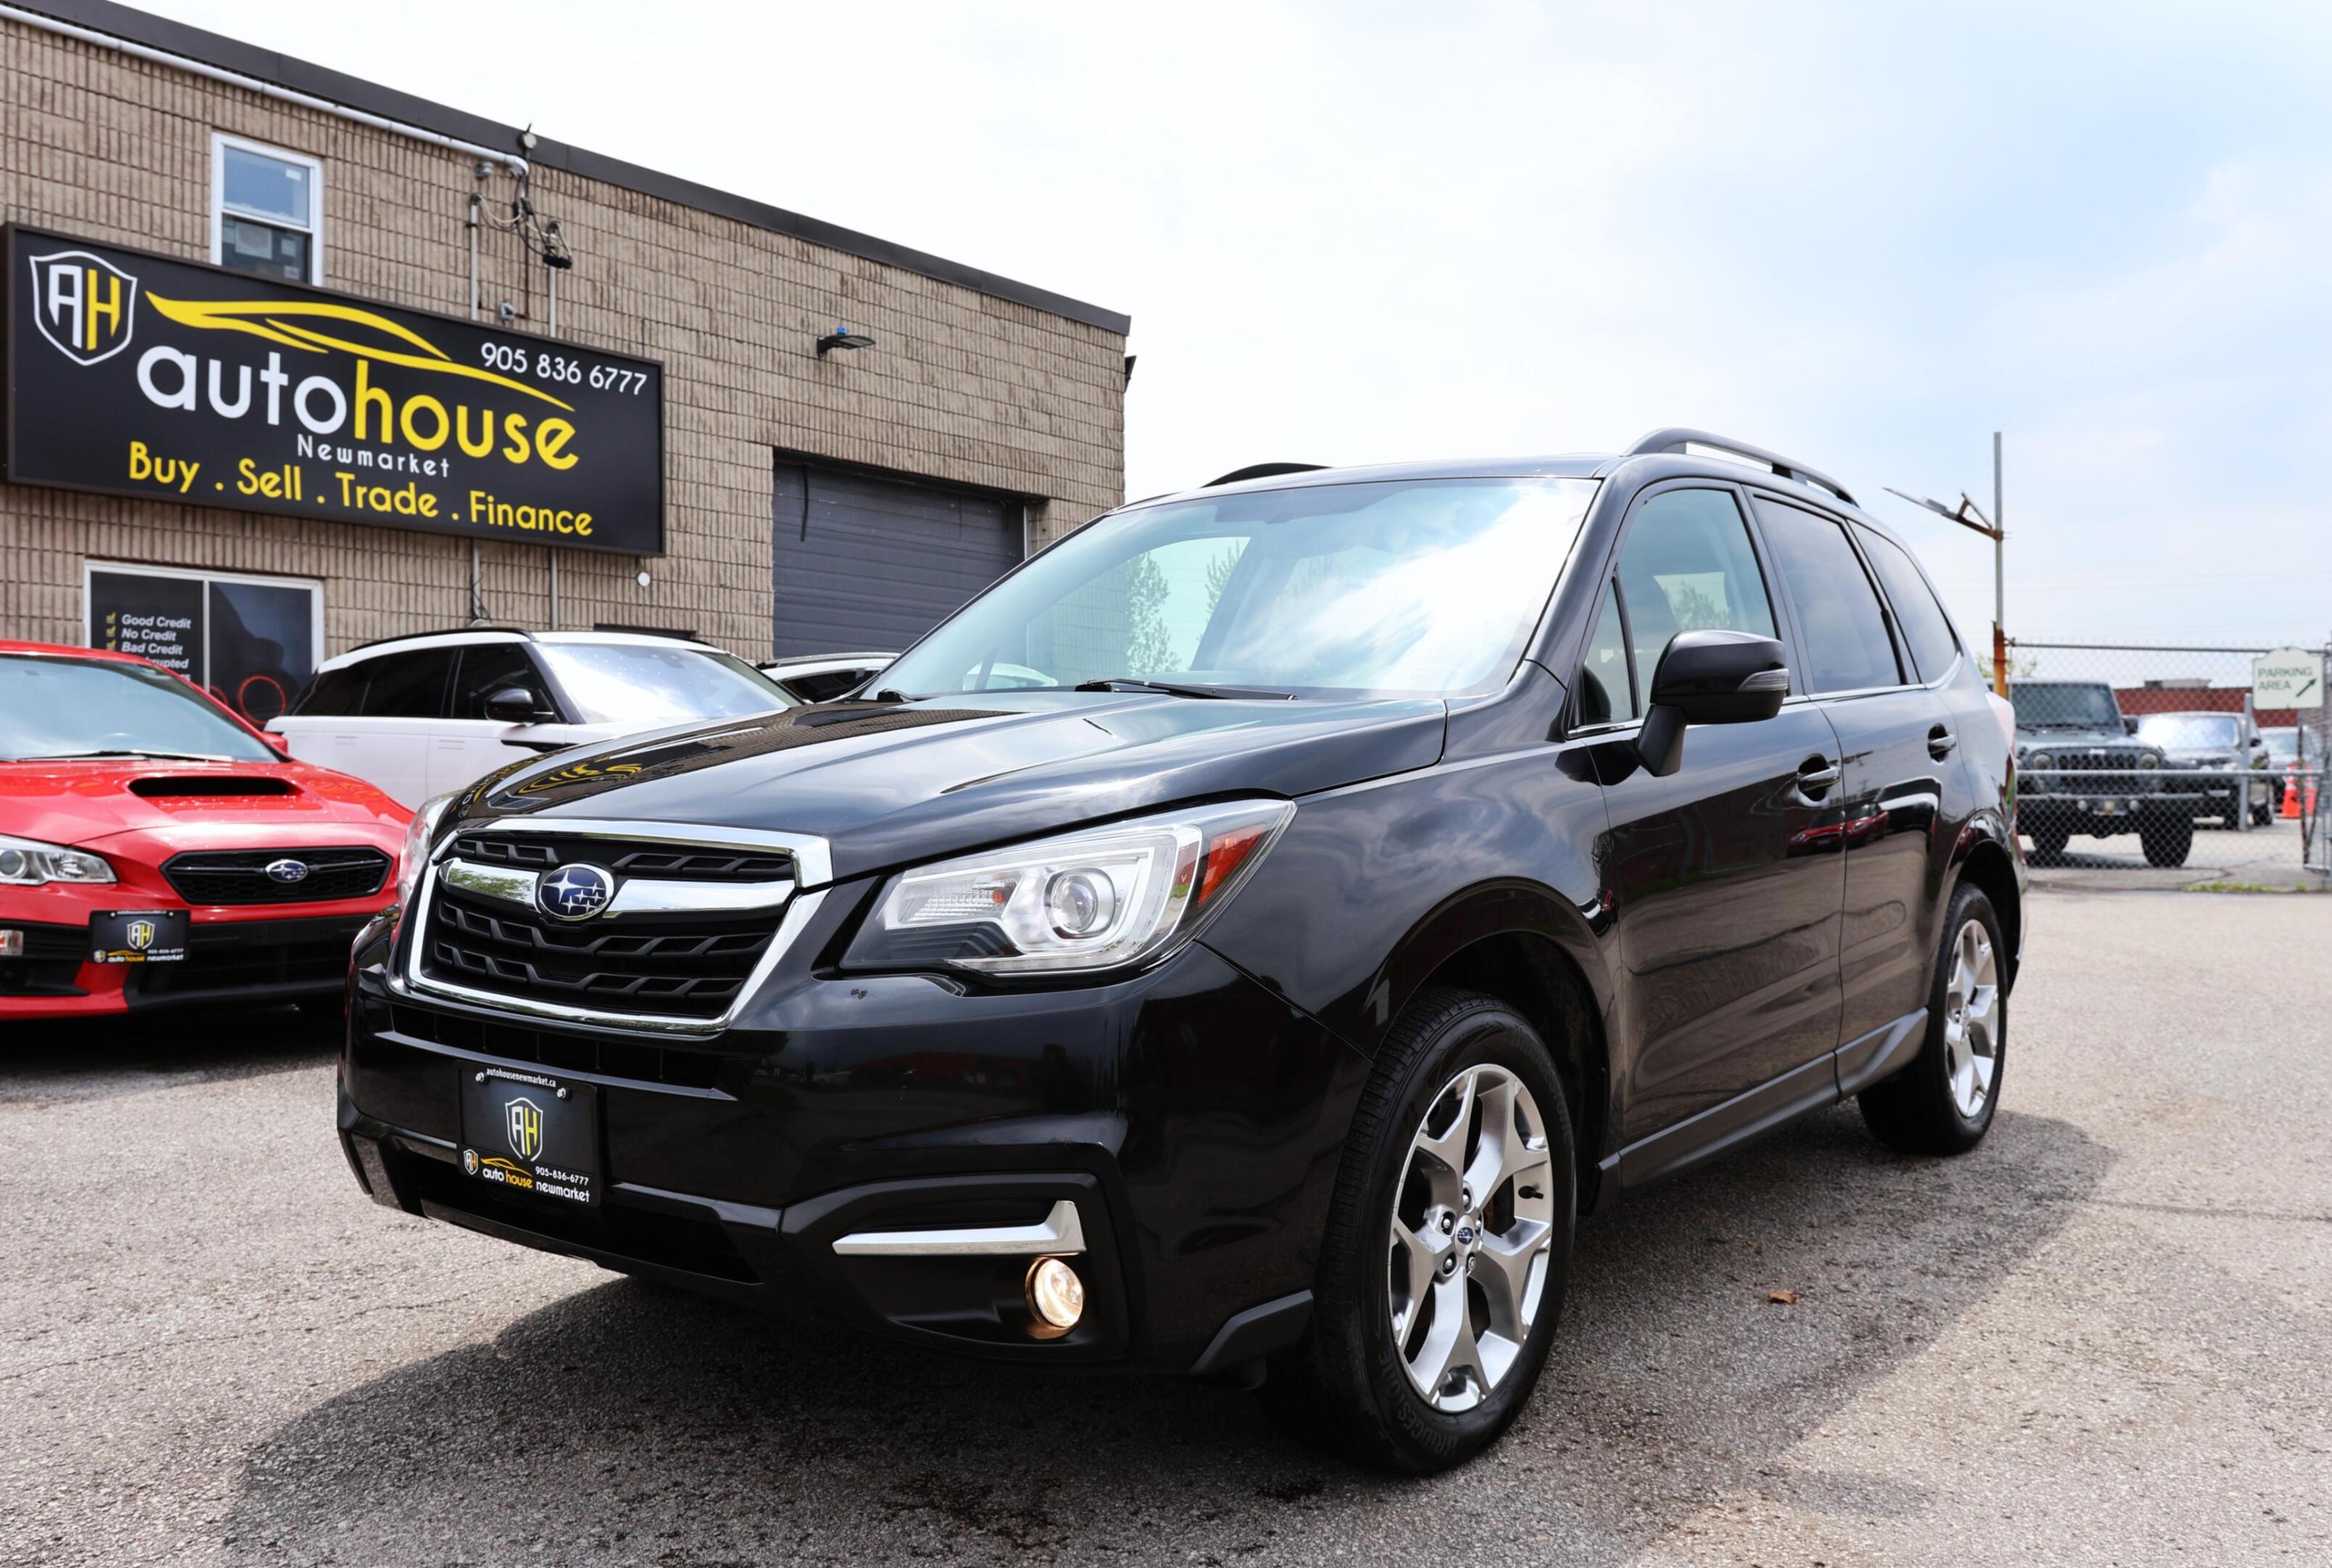 2017 Subaru Forester 2.5-LIMITED-AWD/NAV/LEATHER/P SEAT/PANOROOF/B CAM/